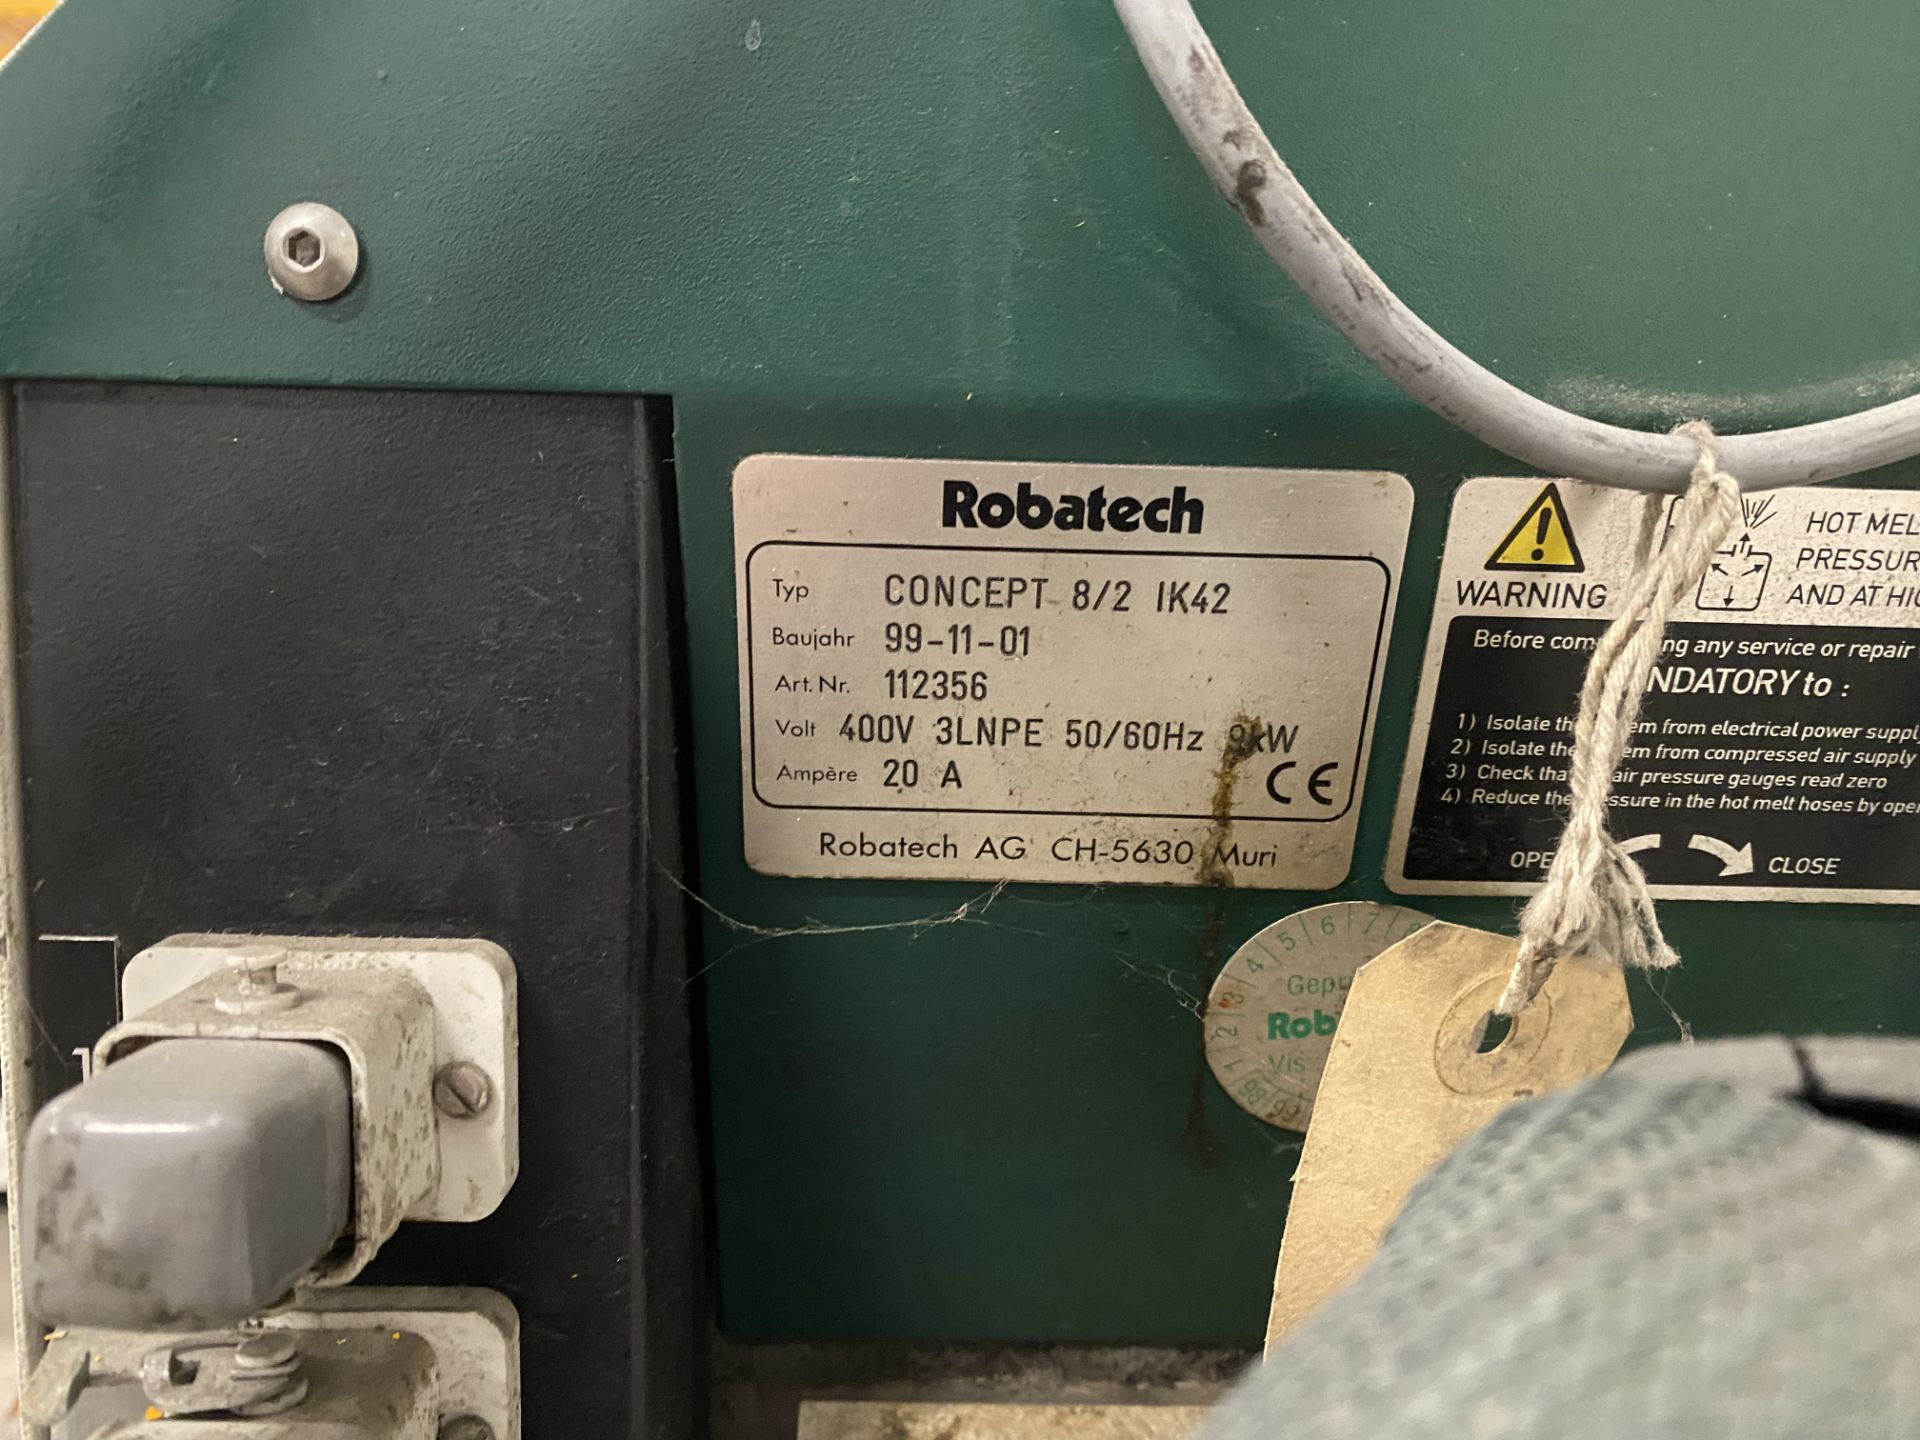 Robatech Concept 8 hot glue melt system, type Concept 8/21K42, serial no. 112356 (2001) - Image 5 of 6